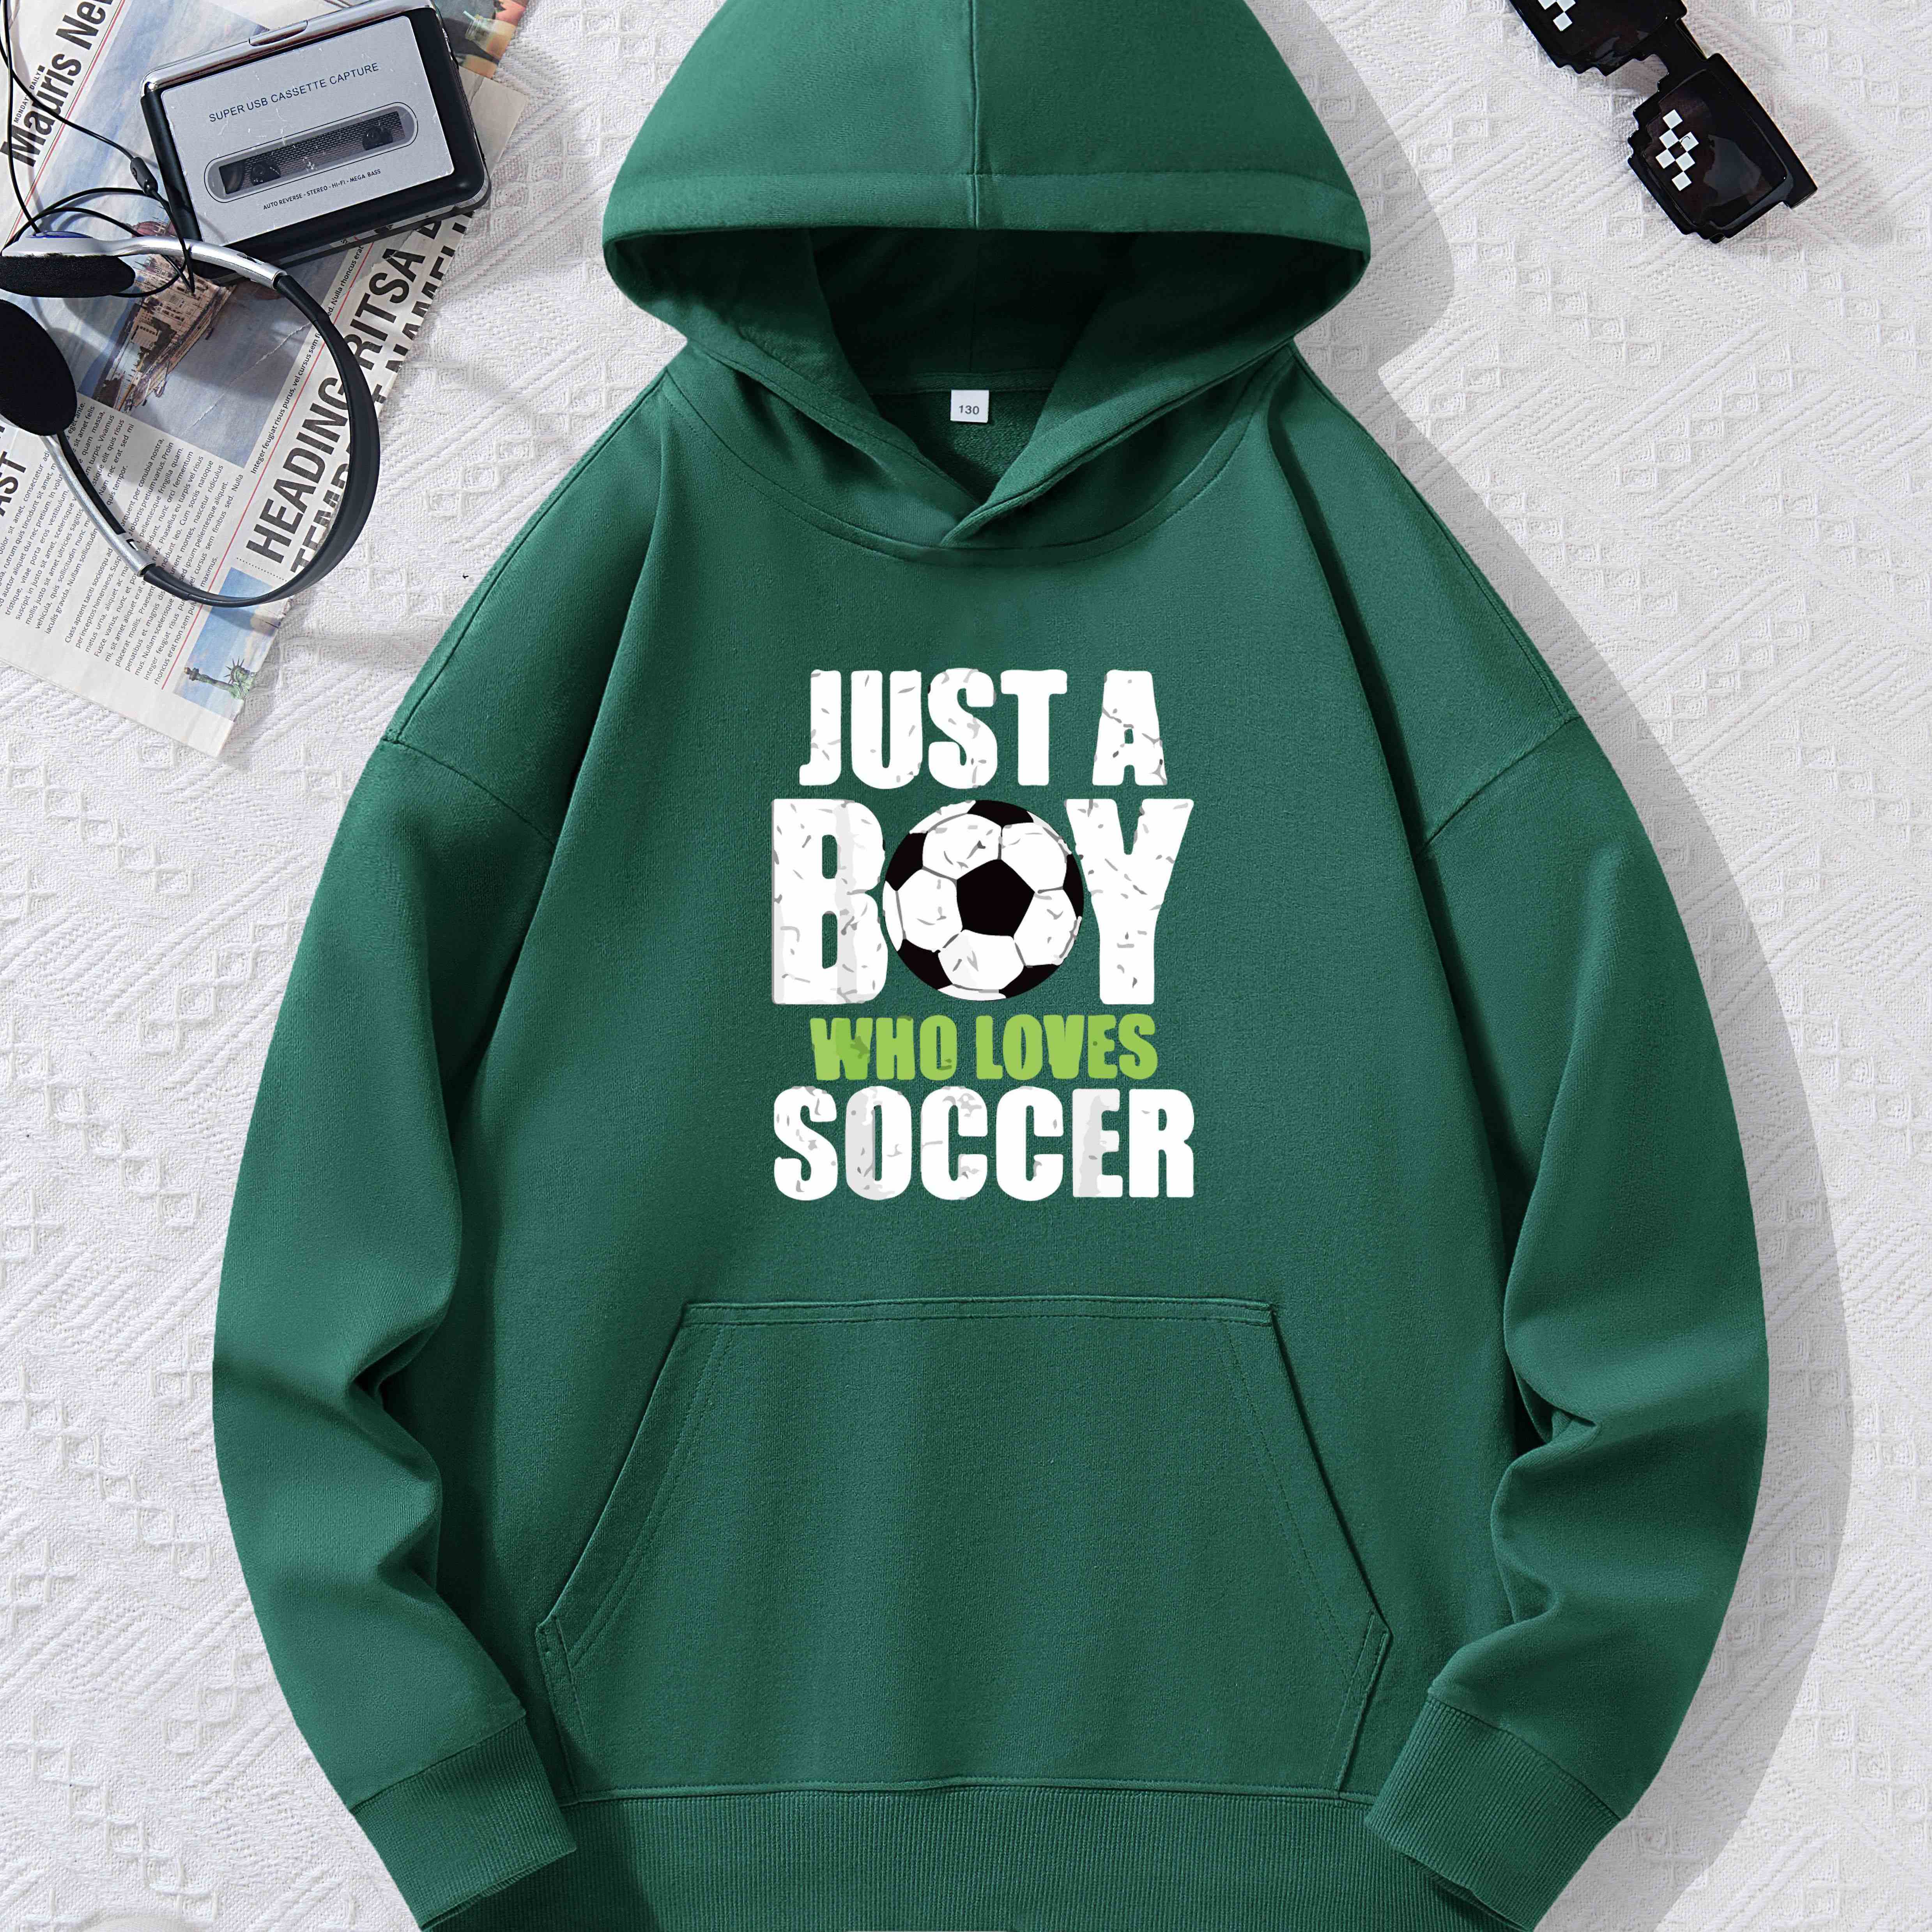 

Just A Boy Who Loves Soccer Letter Print Hoodies For Boys - Casual Graphic Design With Stretch Fabric For Comfortable Autumn/winter Wear